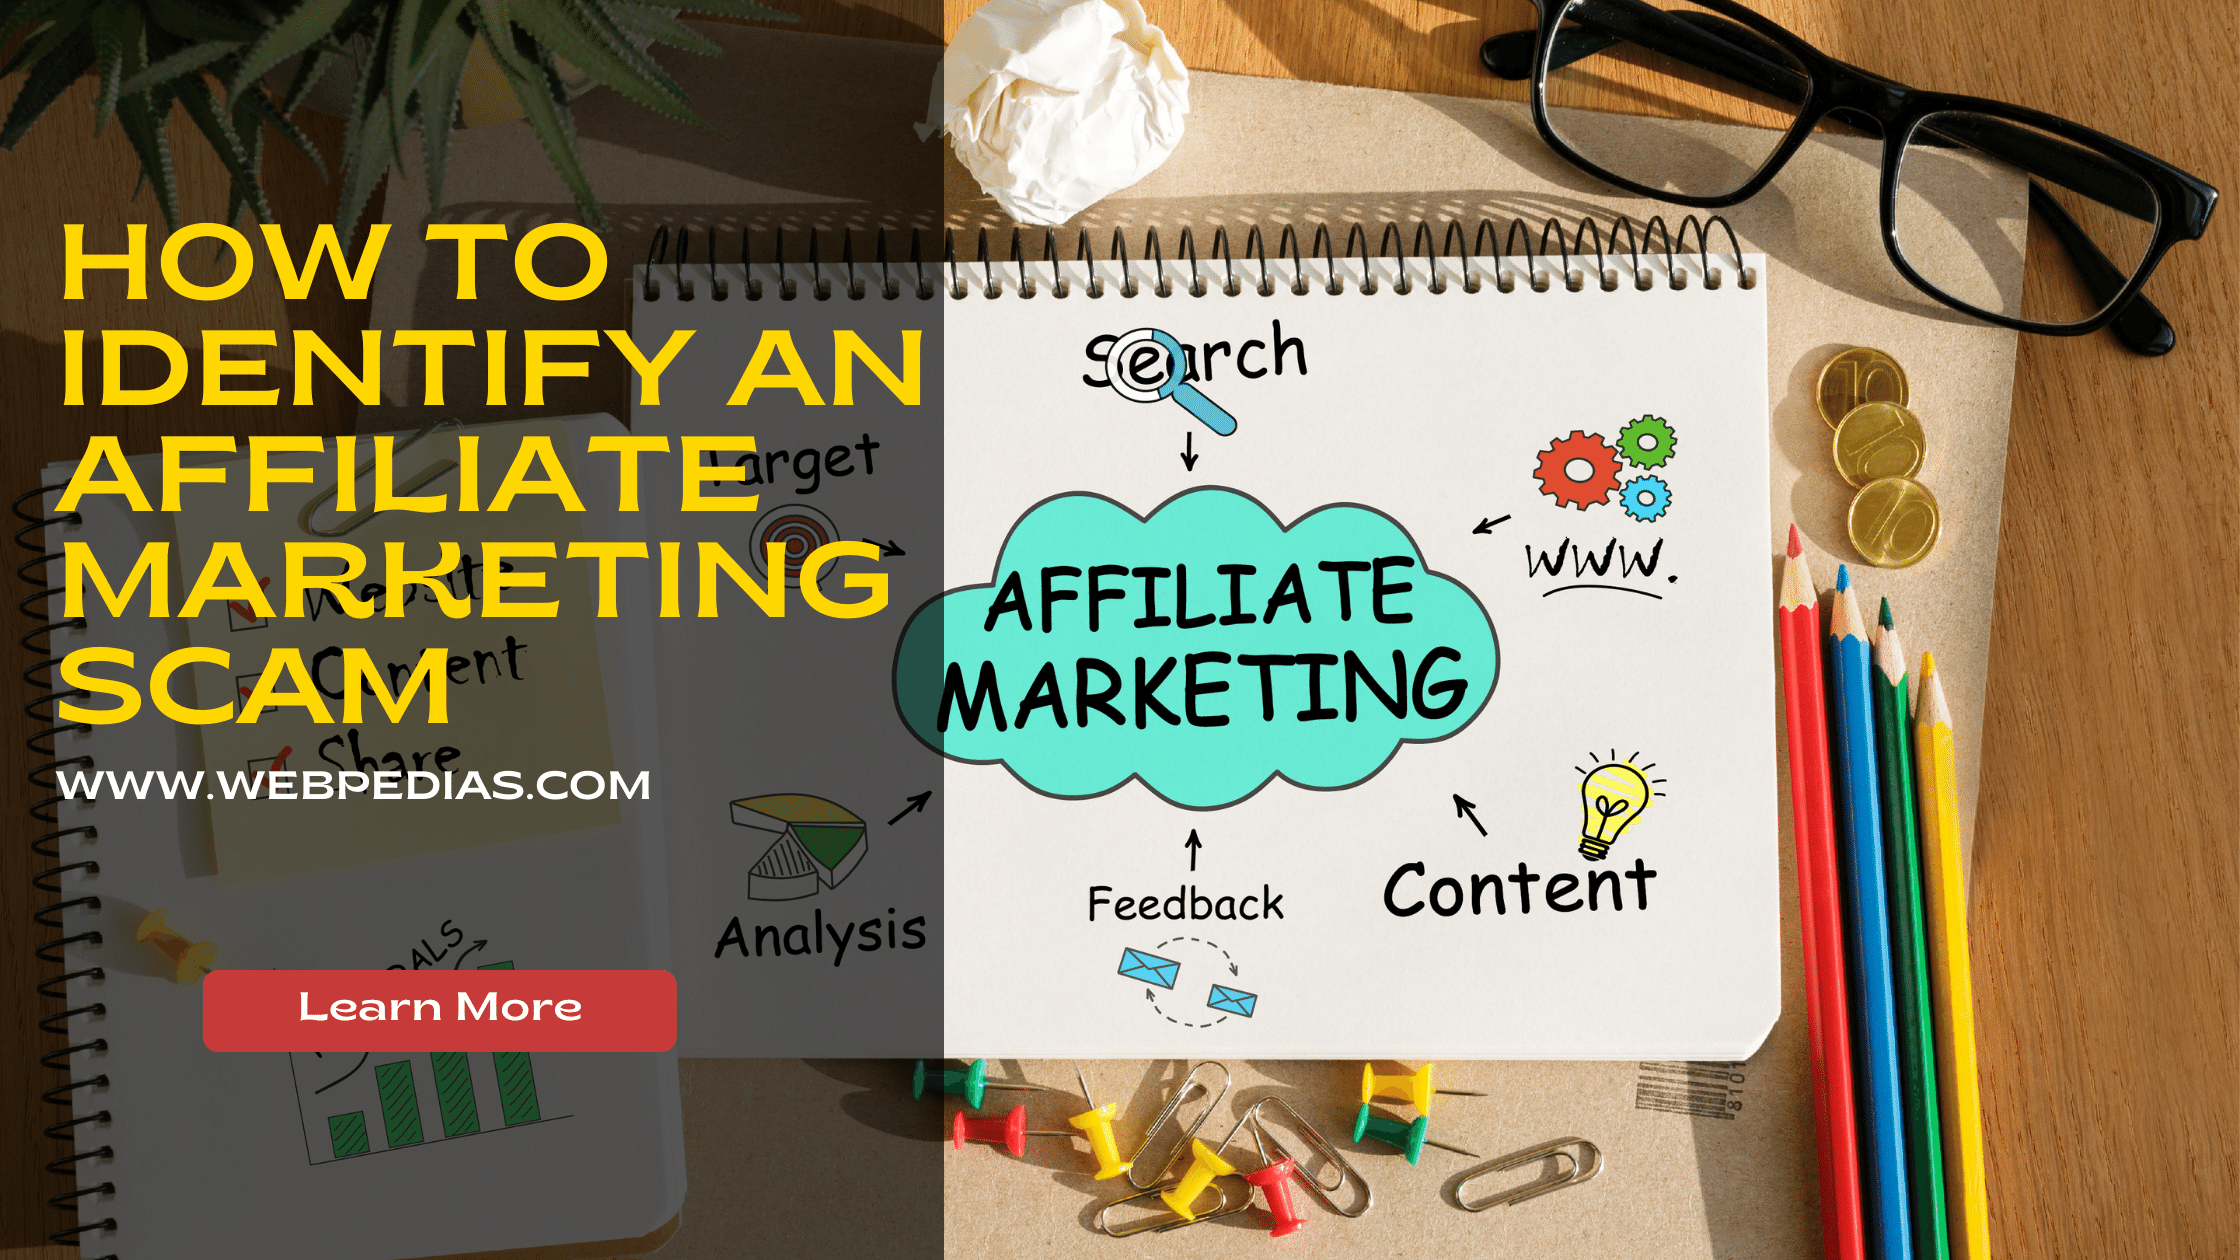 How to Identify an Affiliate Marketing Scam